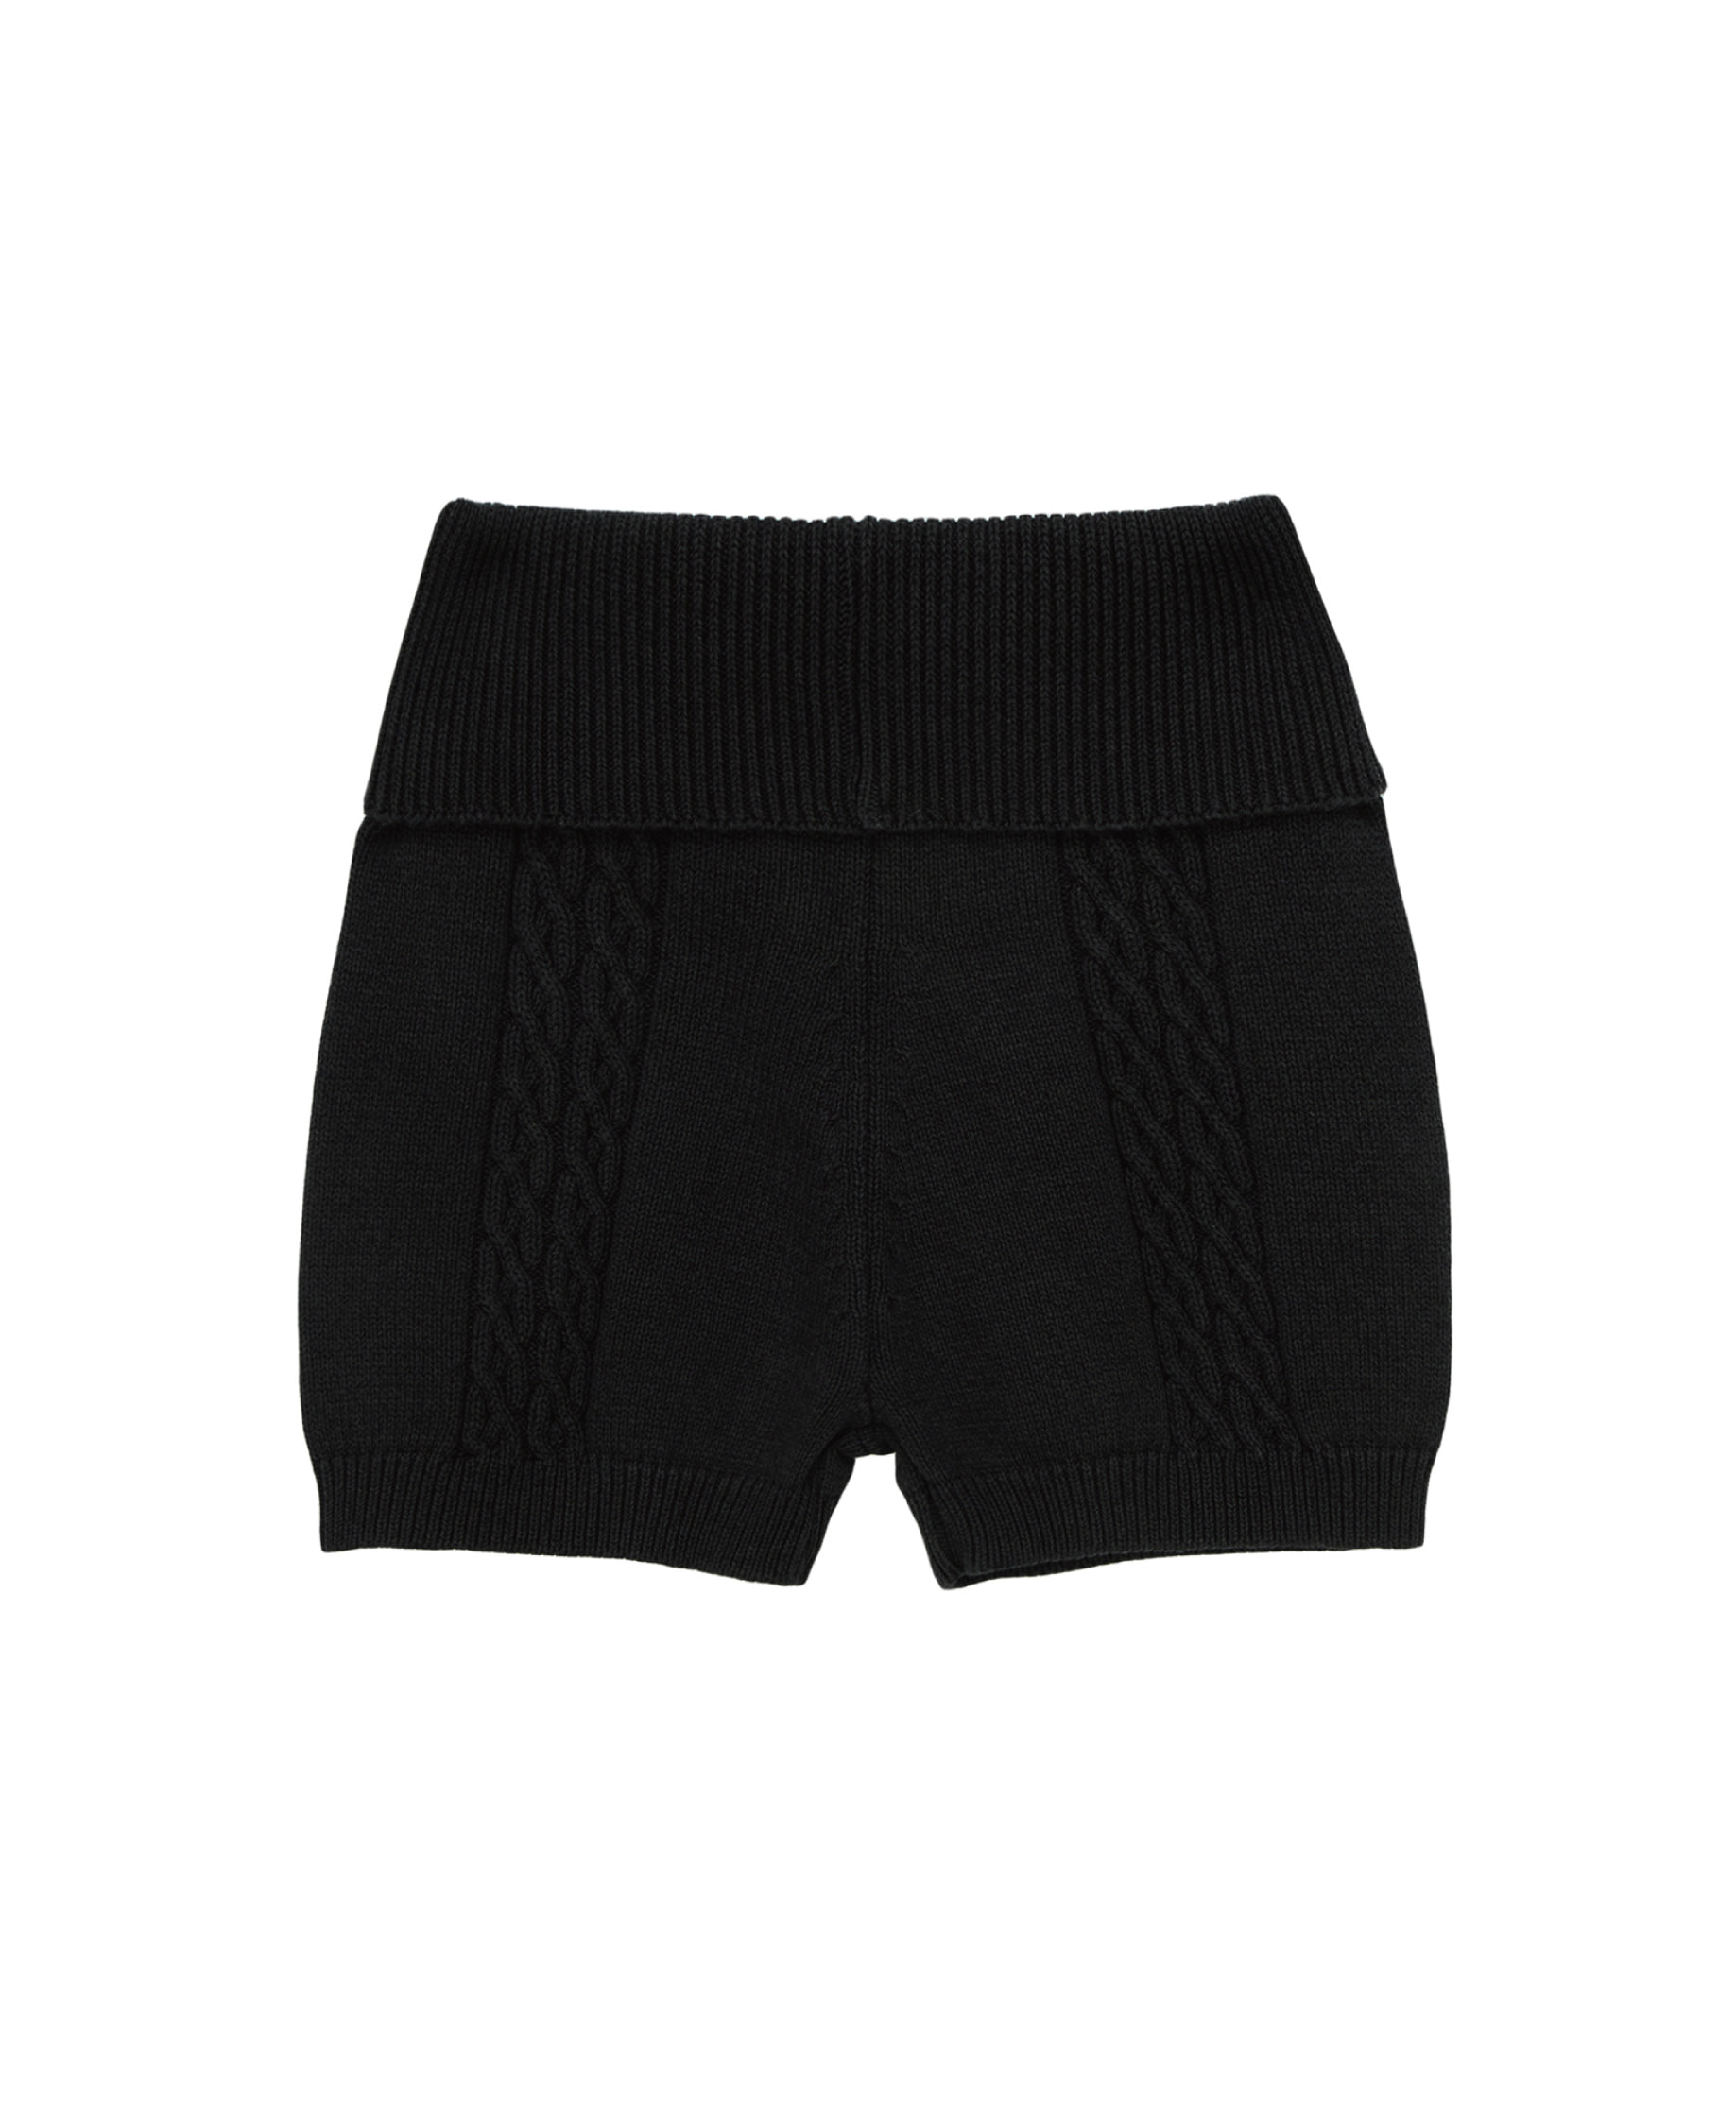 Cable knitted shorts (black)